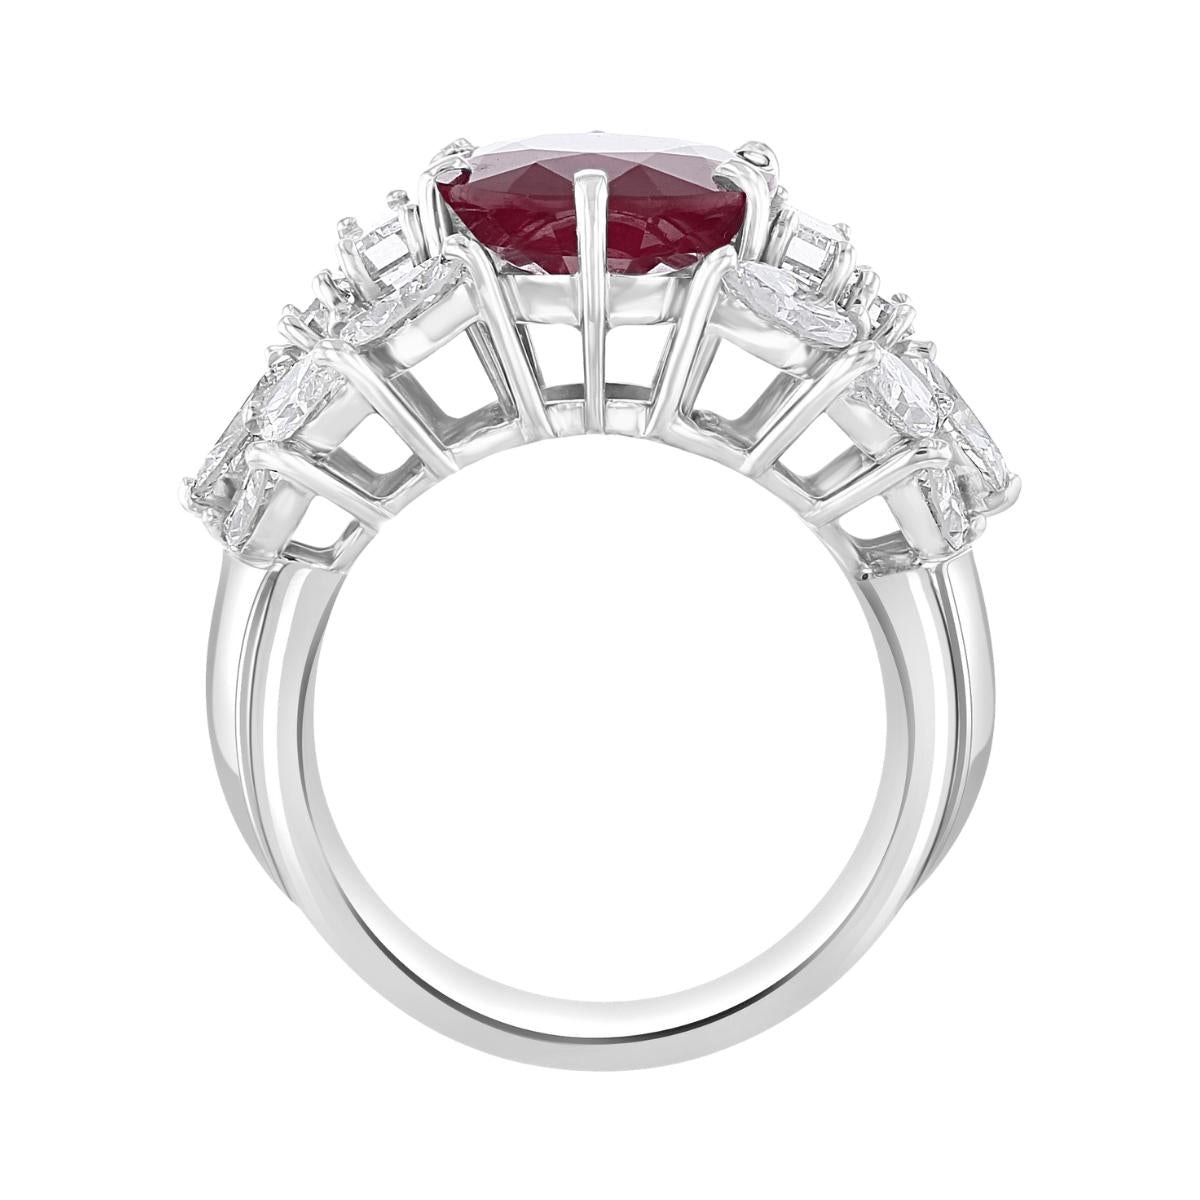 18KT GOLD 6.26 CT RUBY & 3.82 CTW DIAMOND ACCENT VINTAGE RING 4,4.5,5,5.5,6,6.5,7,7.5,8,8.5,9,9.5,10,10.5,11,11.5,12,12.5,13,13.5,14